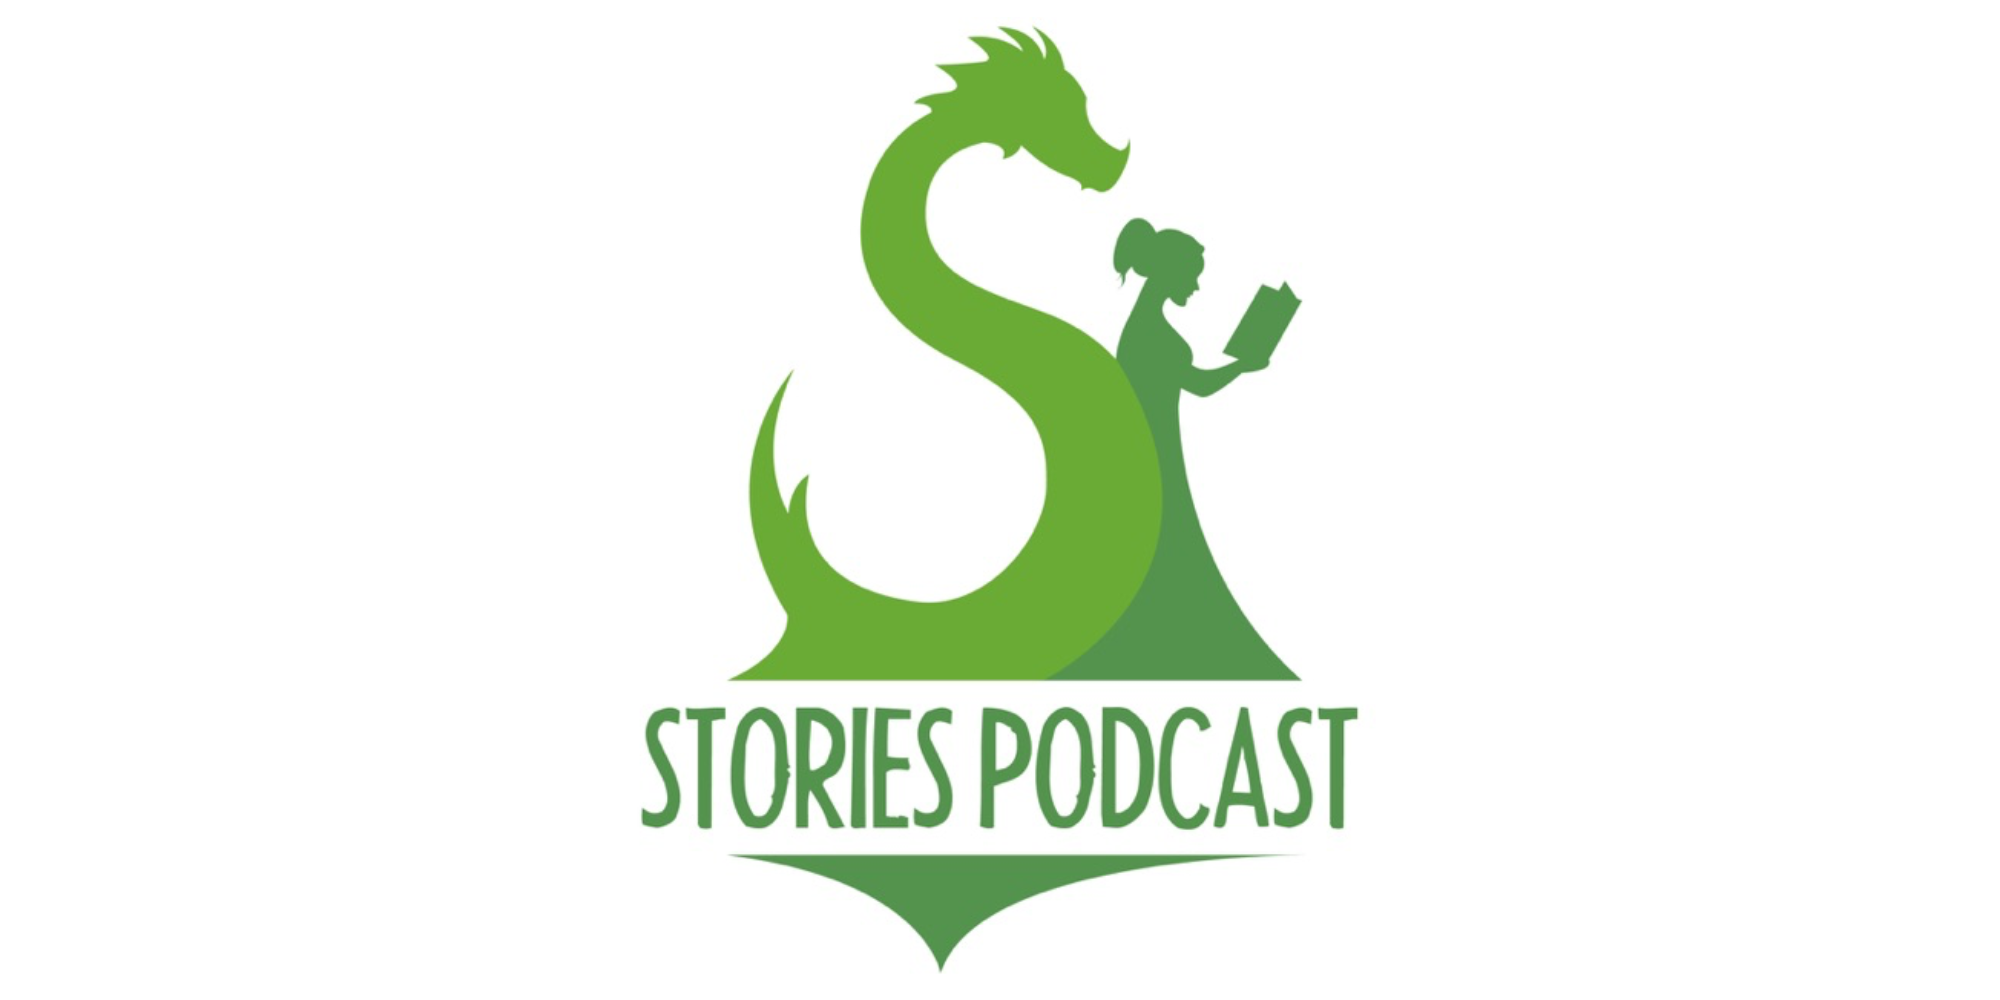 Stories Podcast